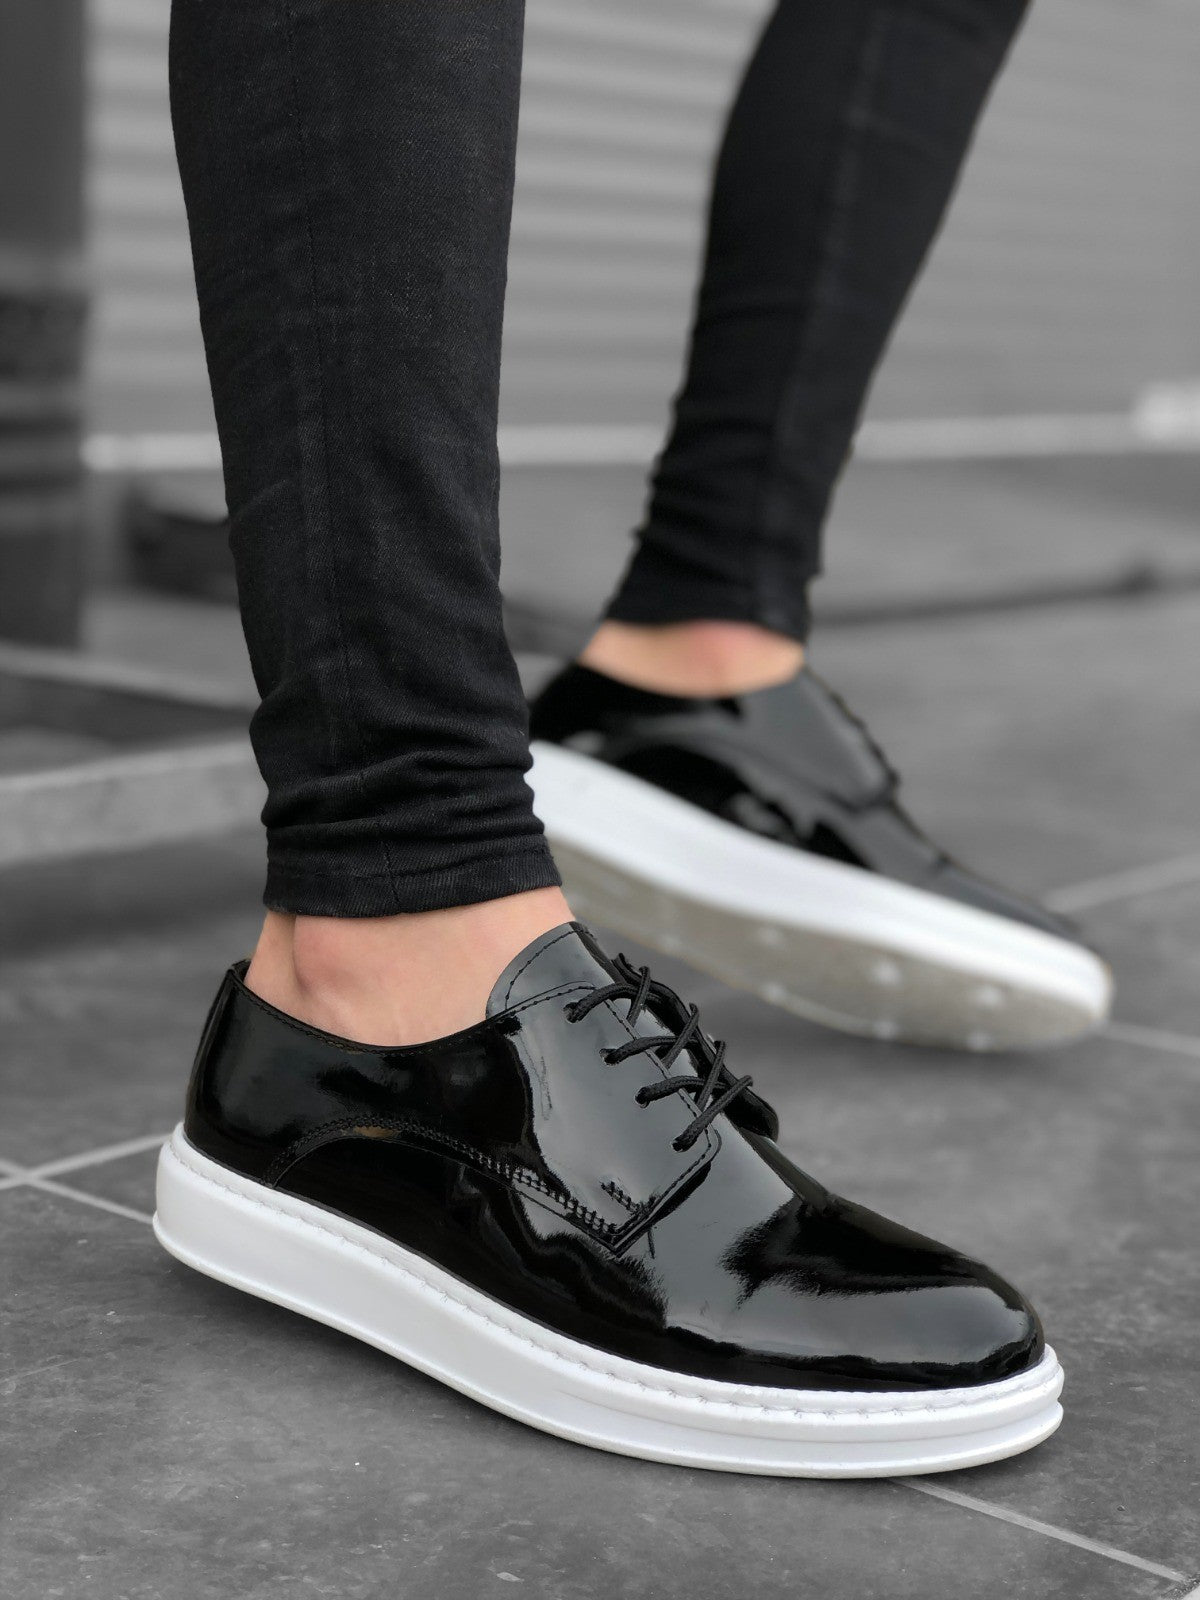 BA0003 Lace-Up Classic Black Patent Leather High Sole Casual Men's Shoes - STREETMODE™